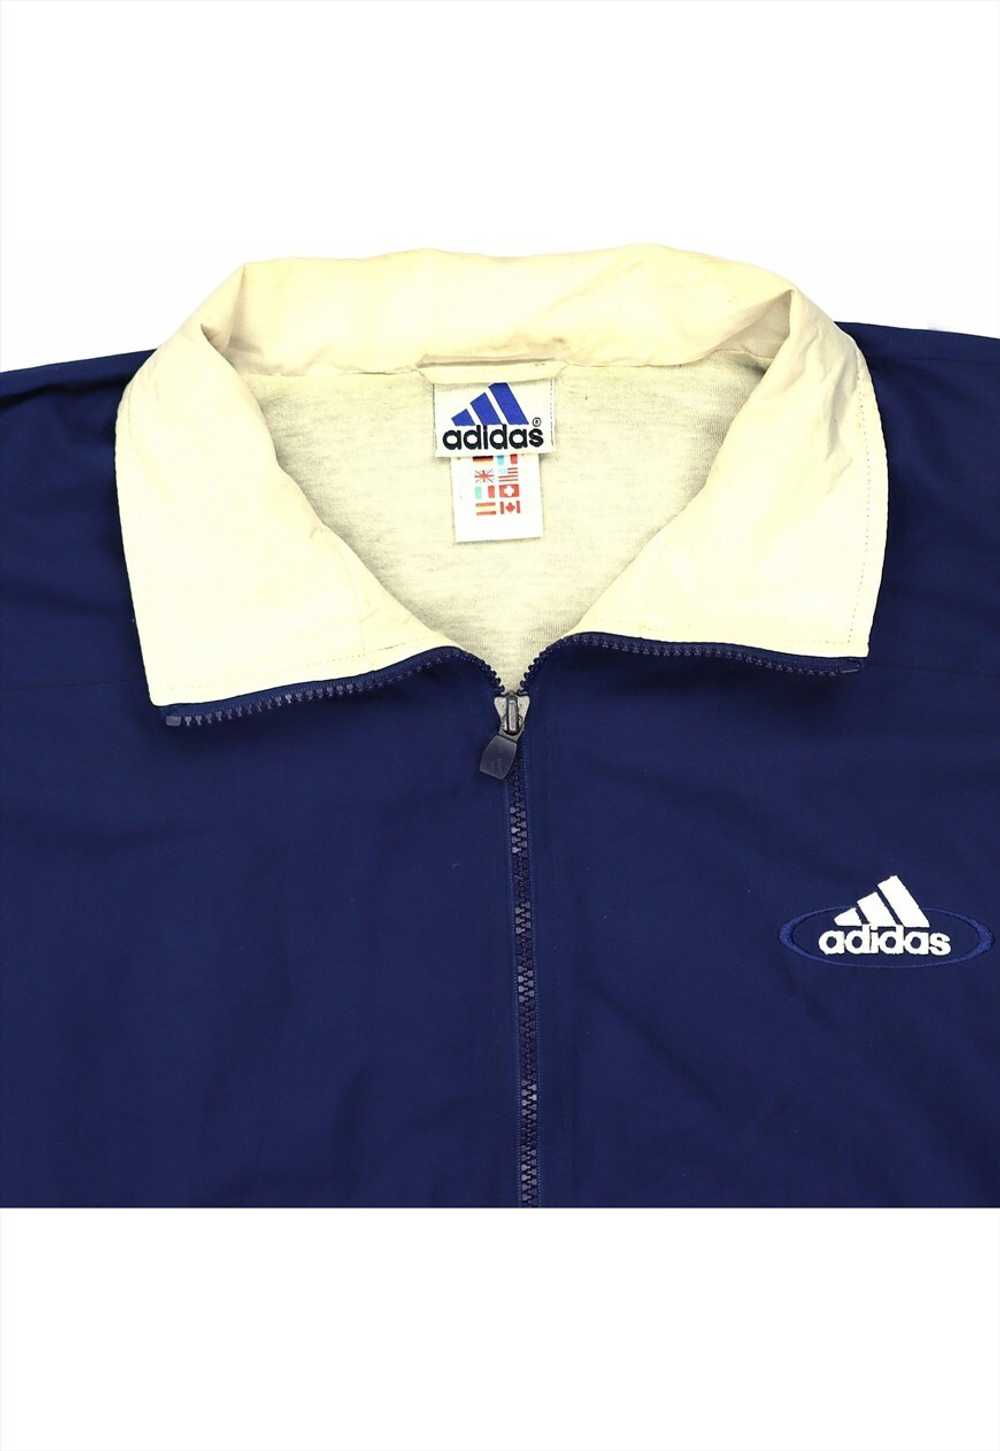 Vintage 90's Adidas Bomber Jacket Spellout Zip Up - image 3